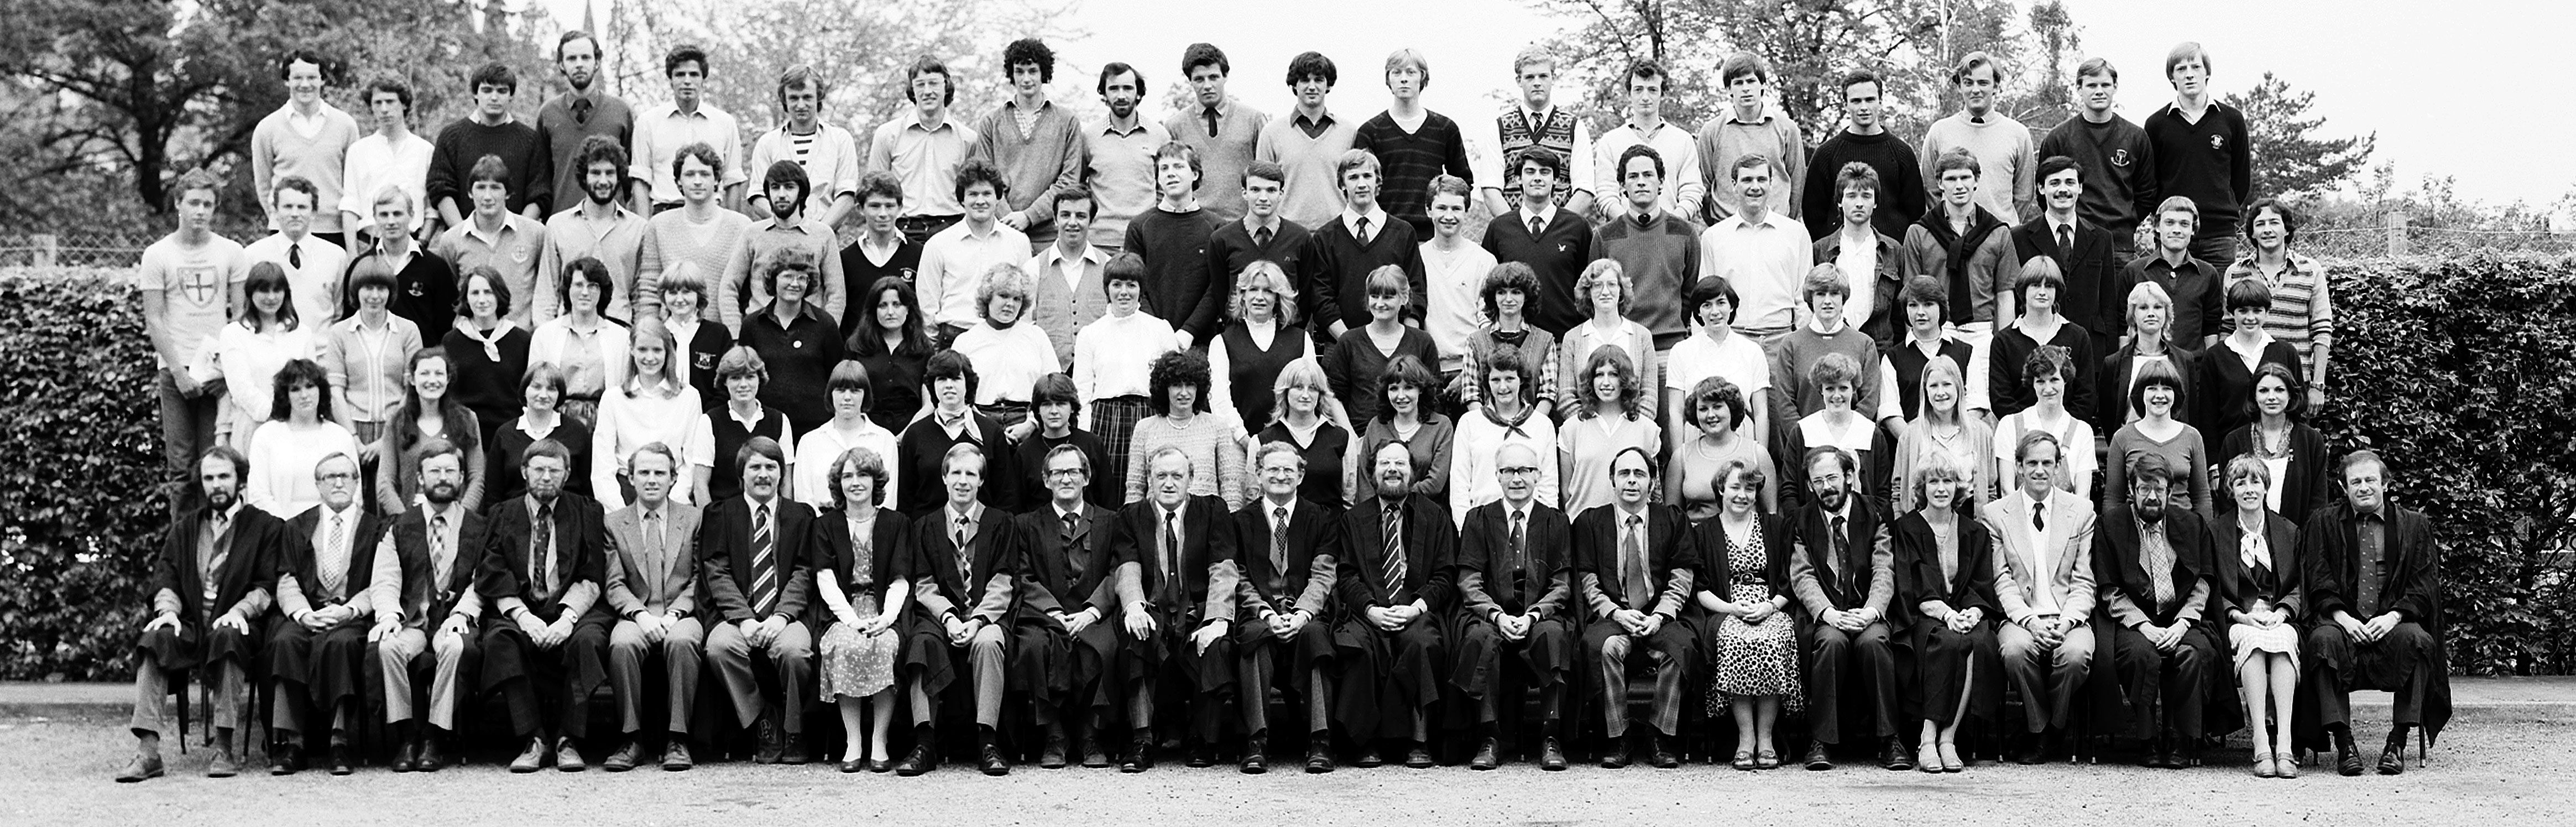 Geography Department Undergraduate Group photo from 1982